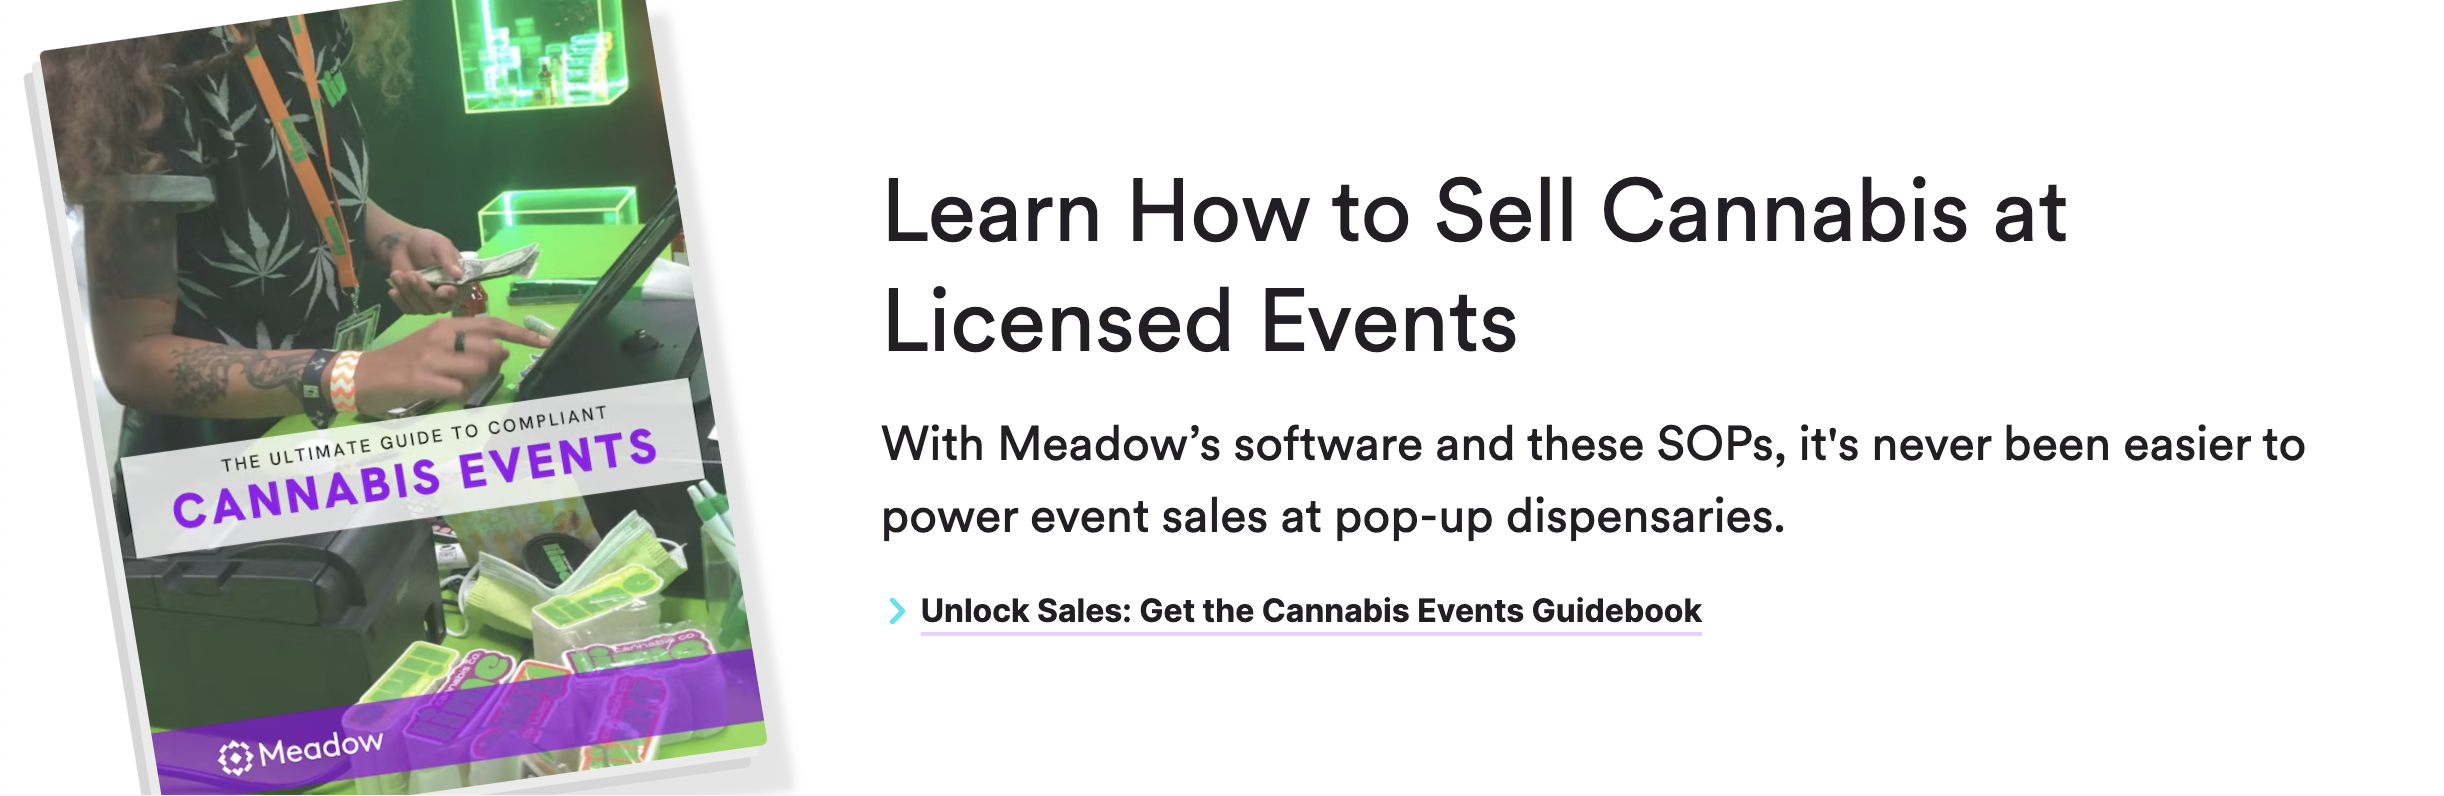 How to sell cannabis at licensed events